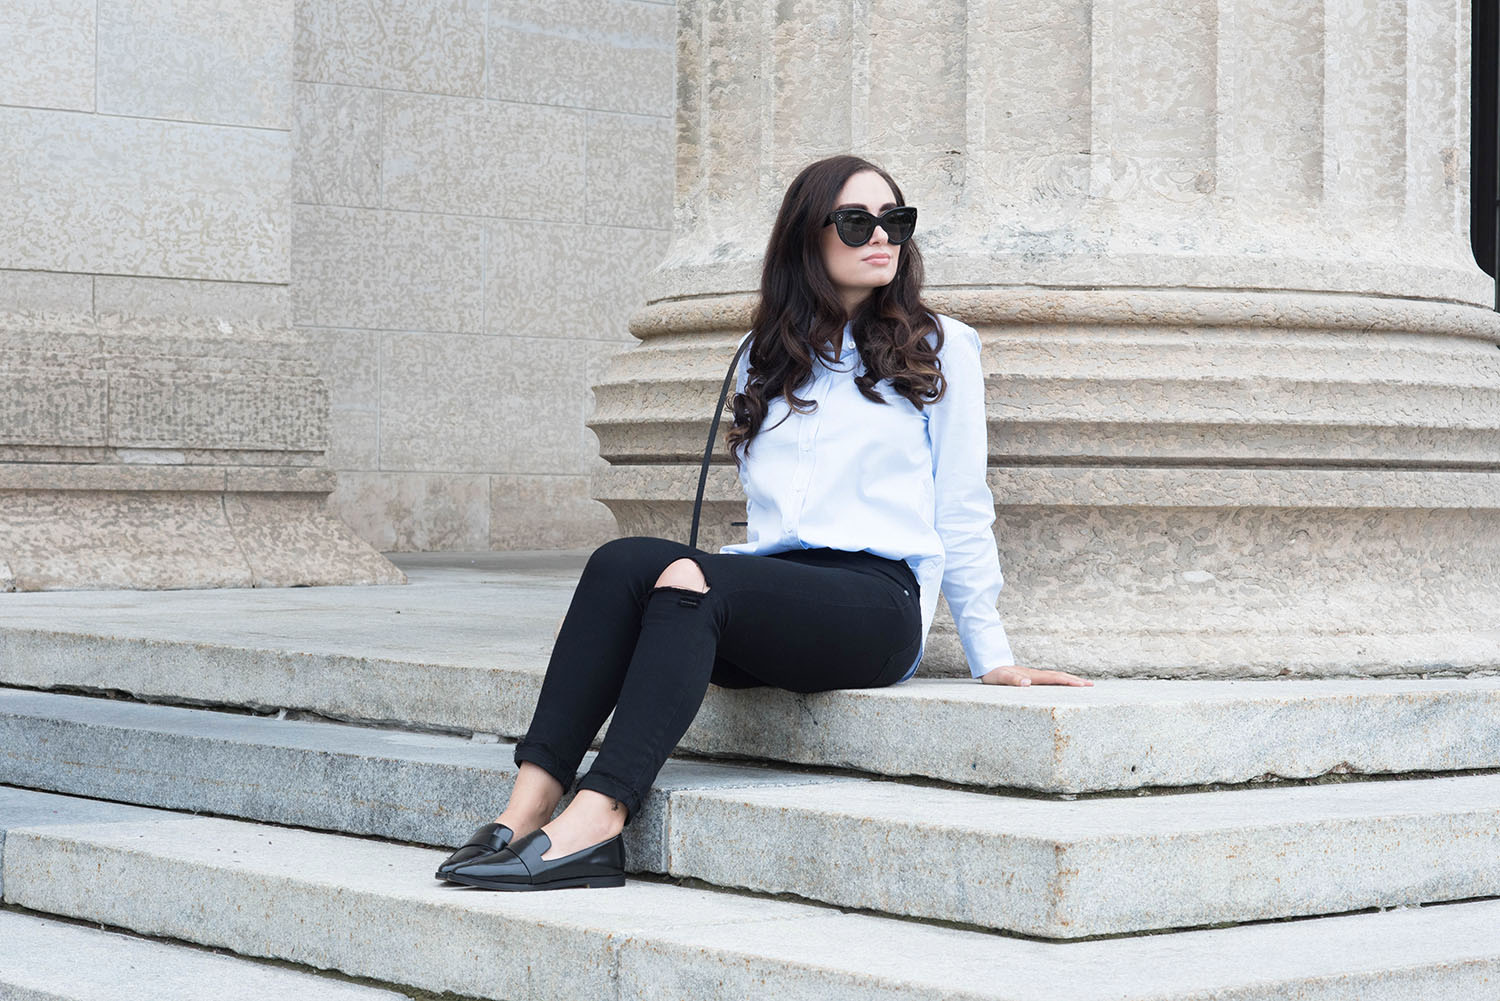 Canadian fashion blogger Cee Fardoe of Coco & Vera sits on the steps of the Manitoba legislature wearing Celine Audrey sunglasses and Paige jeans